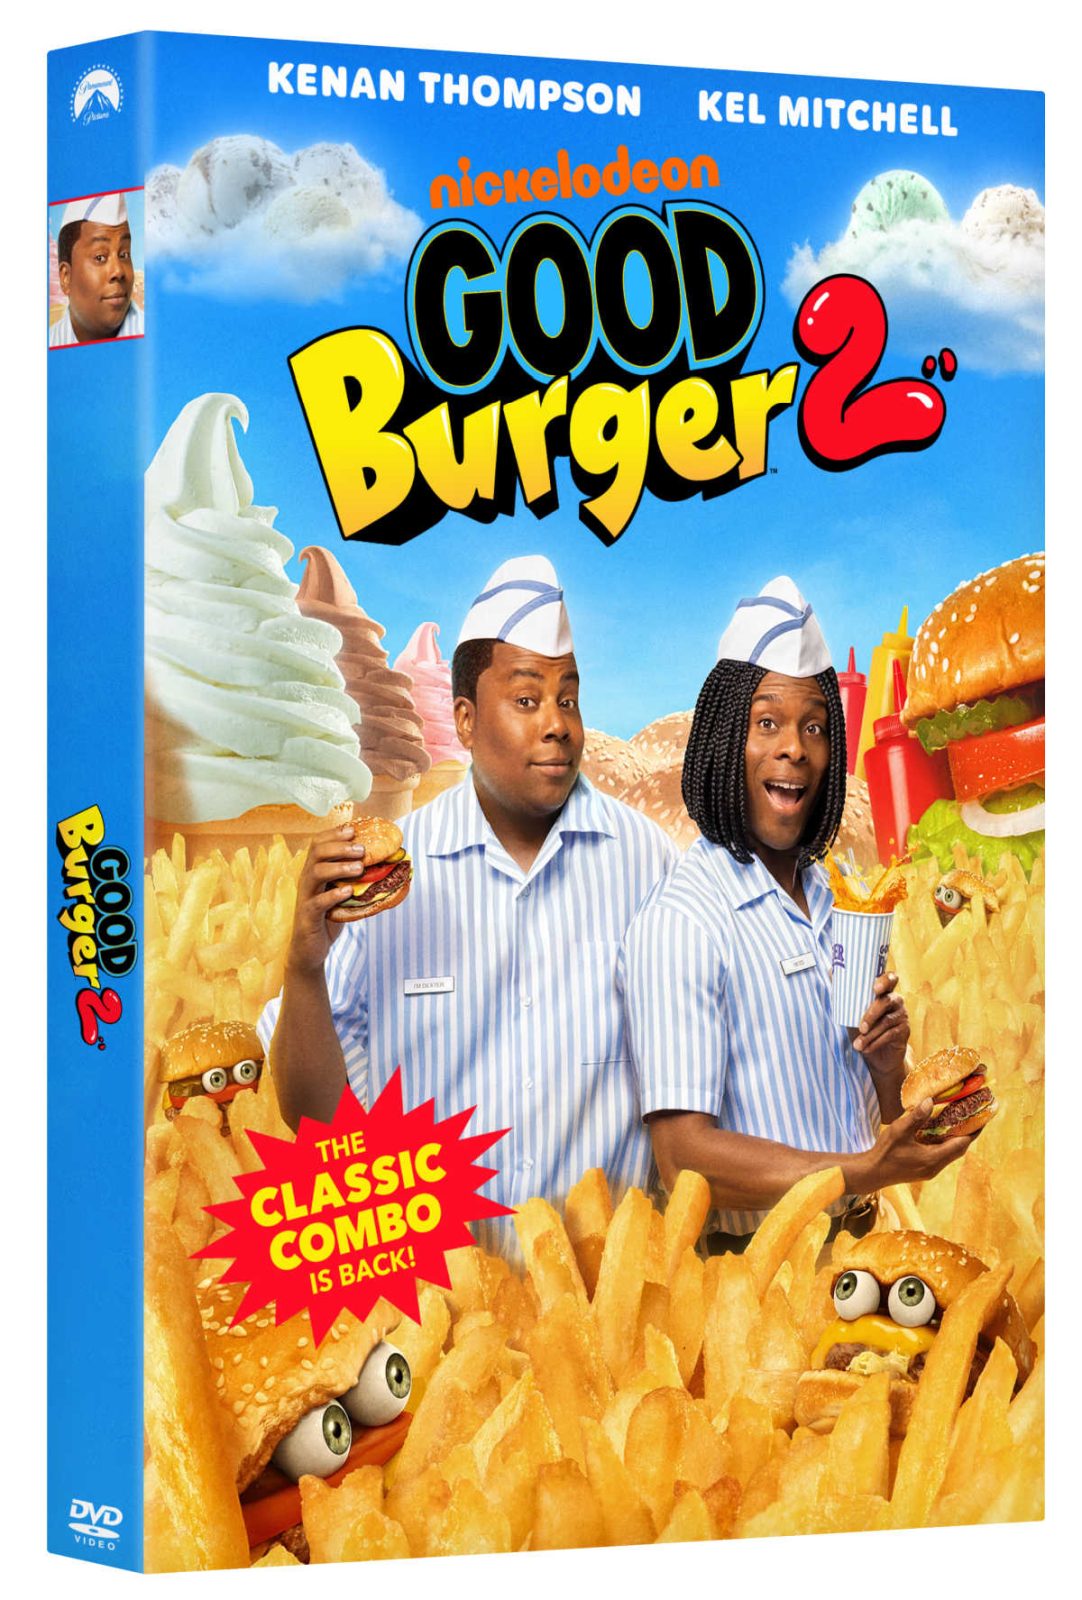 Welcome back Ed and Dex as Good Burger 2 serves up a fresh batch of laughs. The movie has familiar faces, new antics, and the same hilarious hijinks you loved from the original. Buckle up for a fun-filled ride!